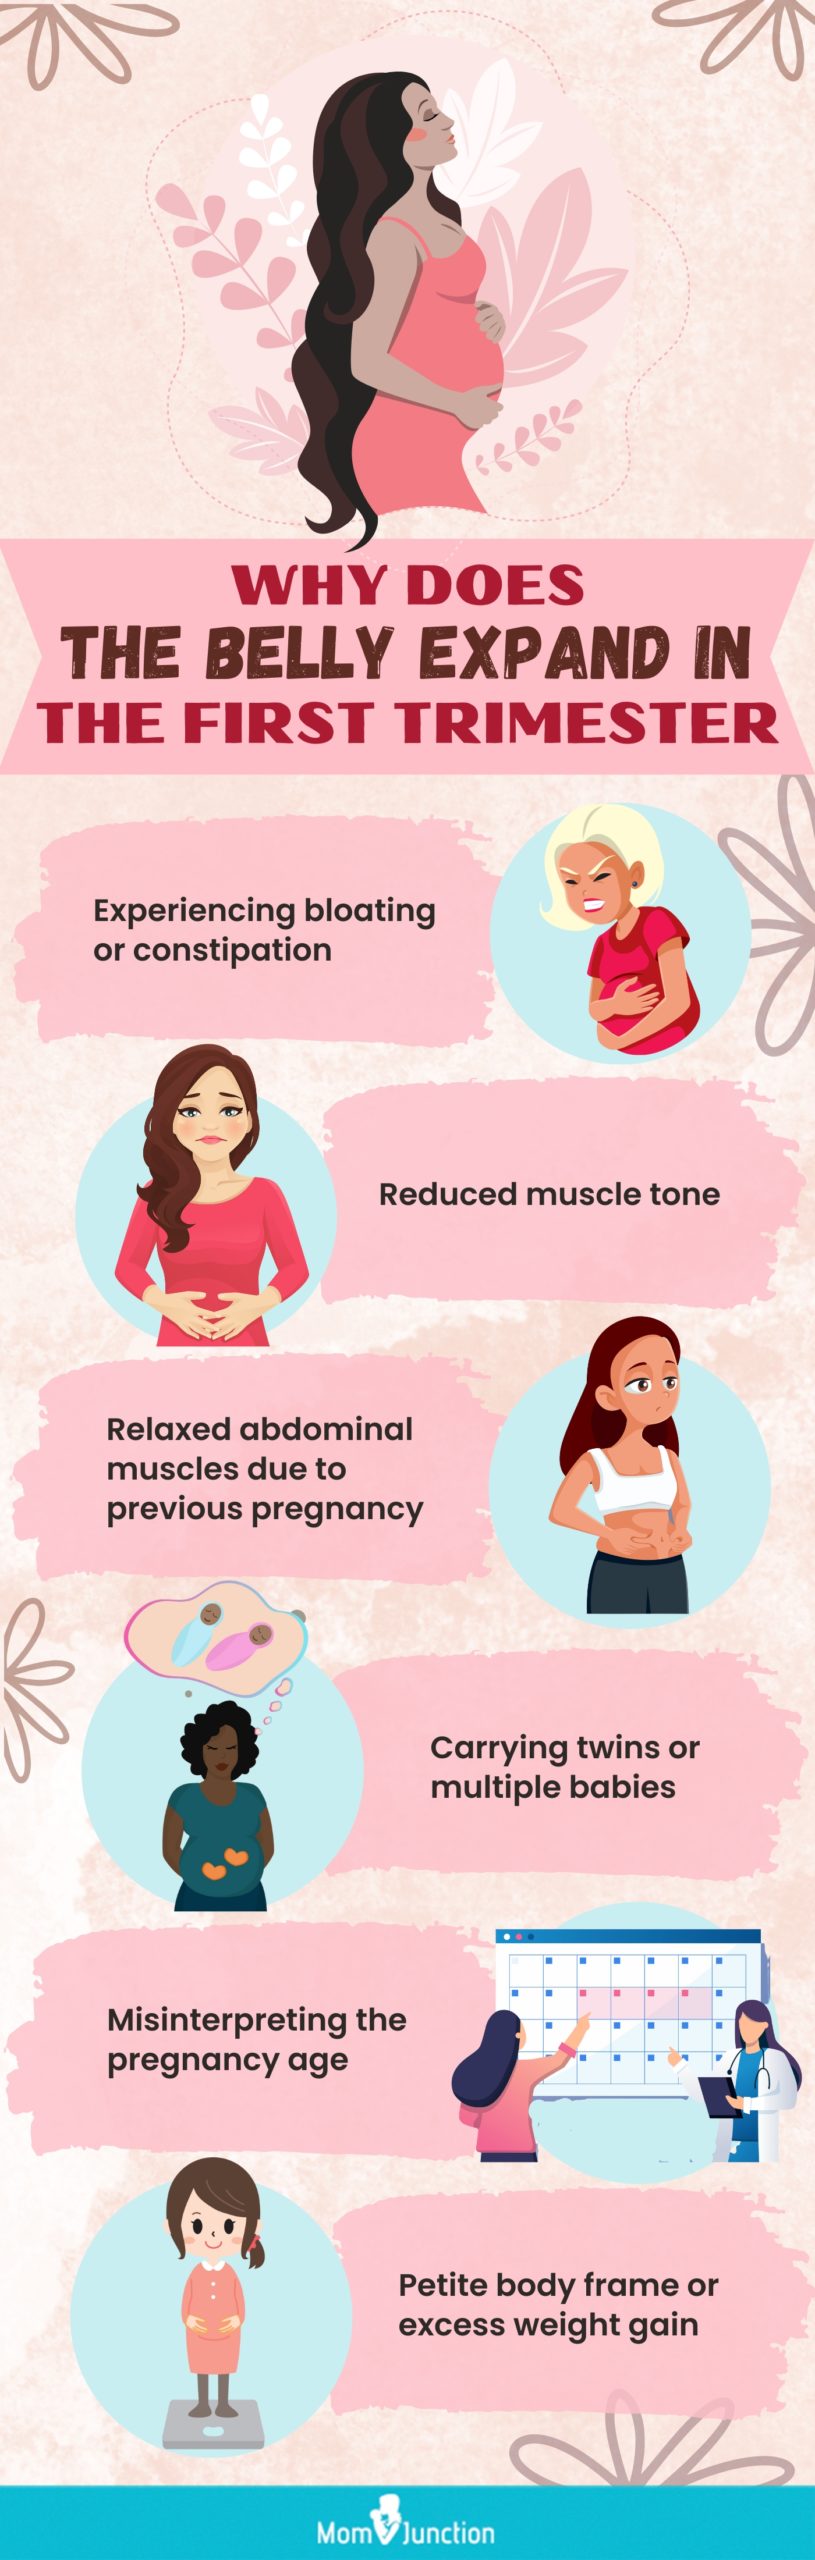 why does the belly expand in the first trimester (infographic)